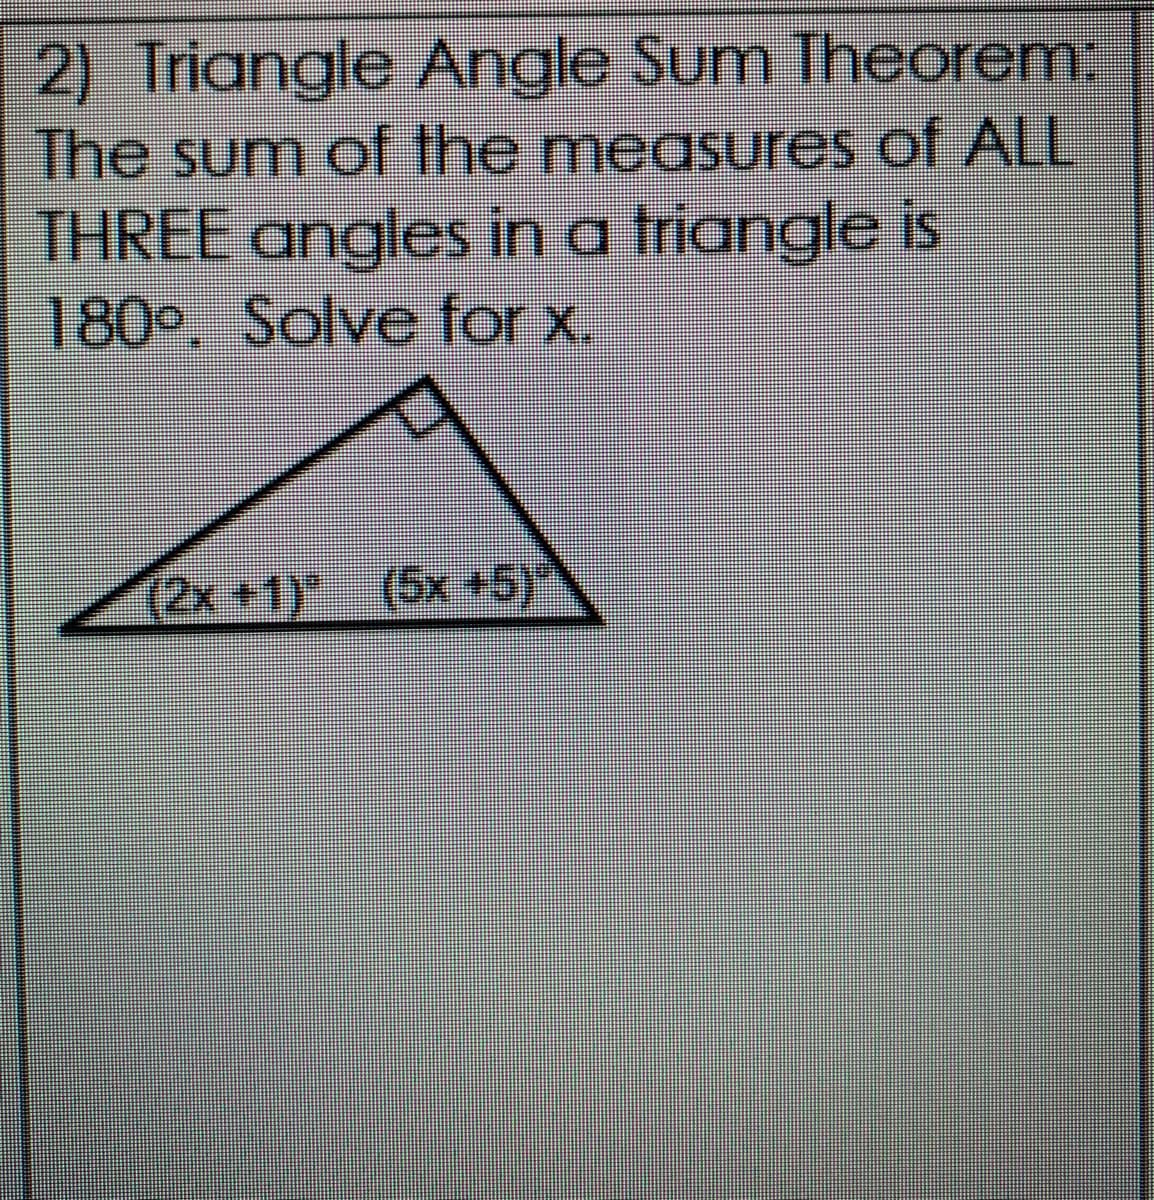 2) Triangle Angle Sum Theorem:
The sum of the measures of ALL
THREE angles in a triangle is
180° Solve for x.
(2x+1) (6x +5)
